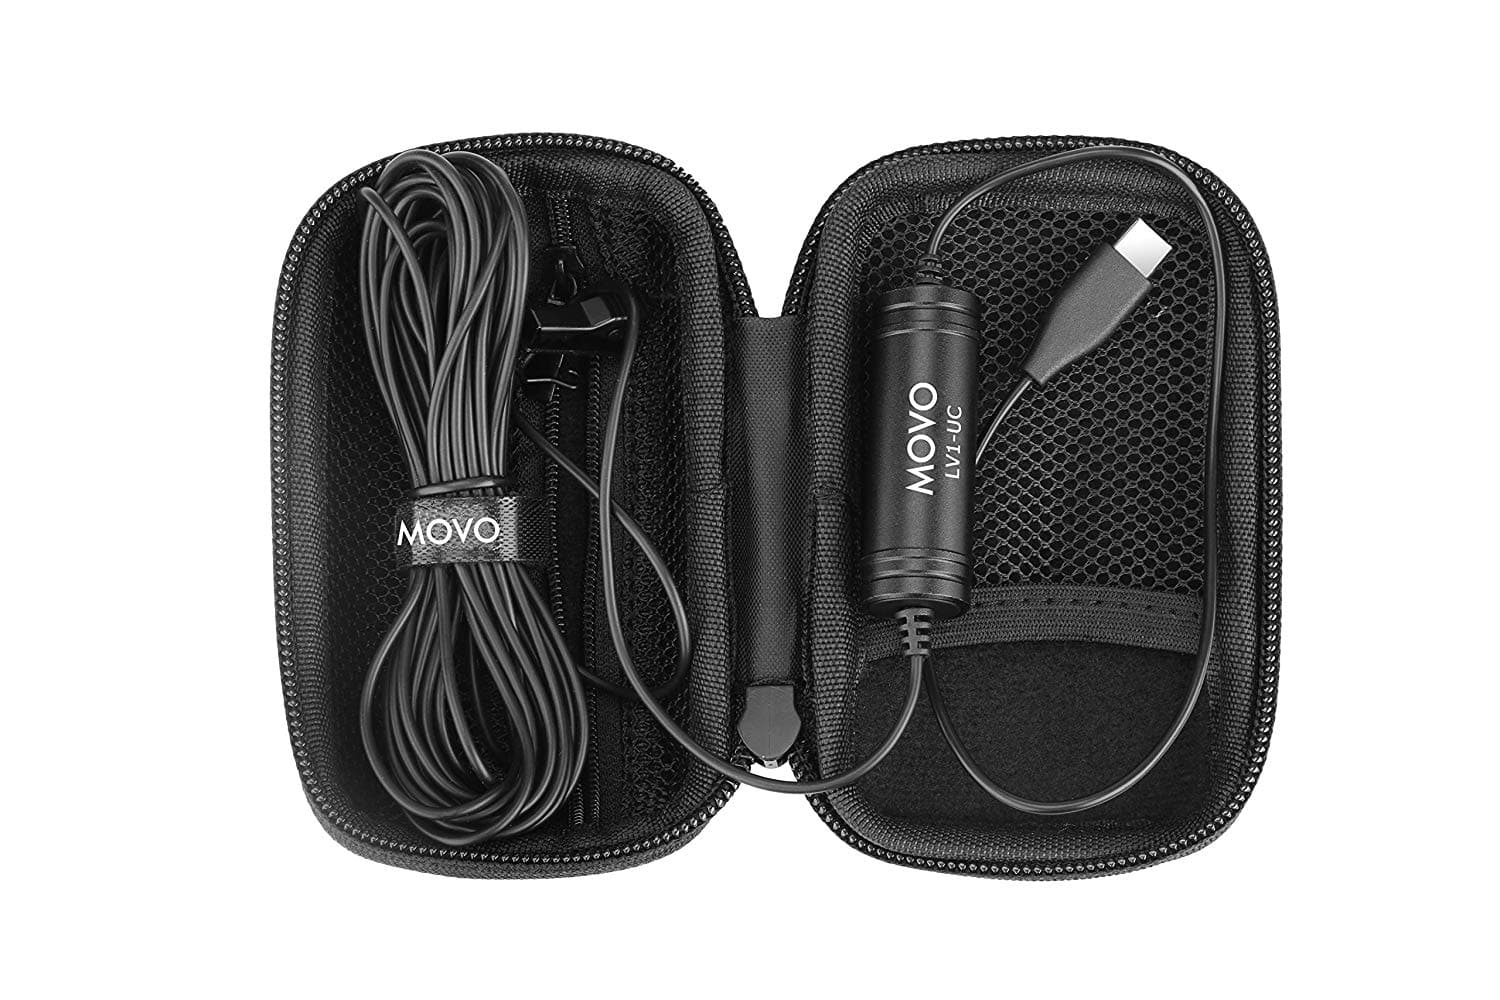 LV1-UC | Digital Lav Omni Clip-on Mic with USB Type-C Connector | Movo